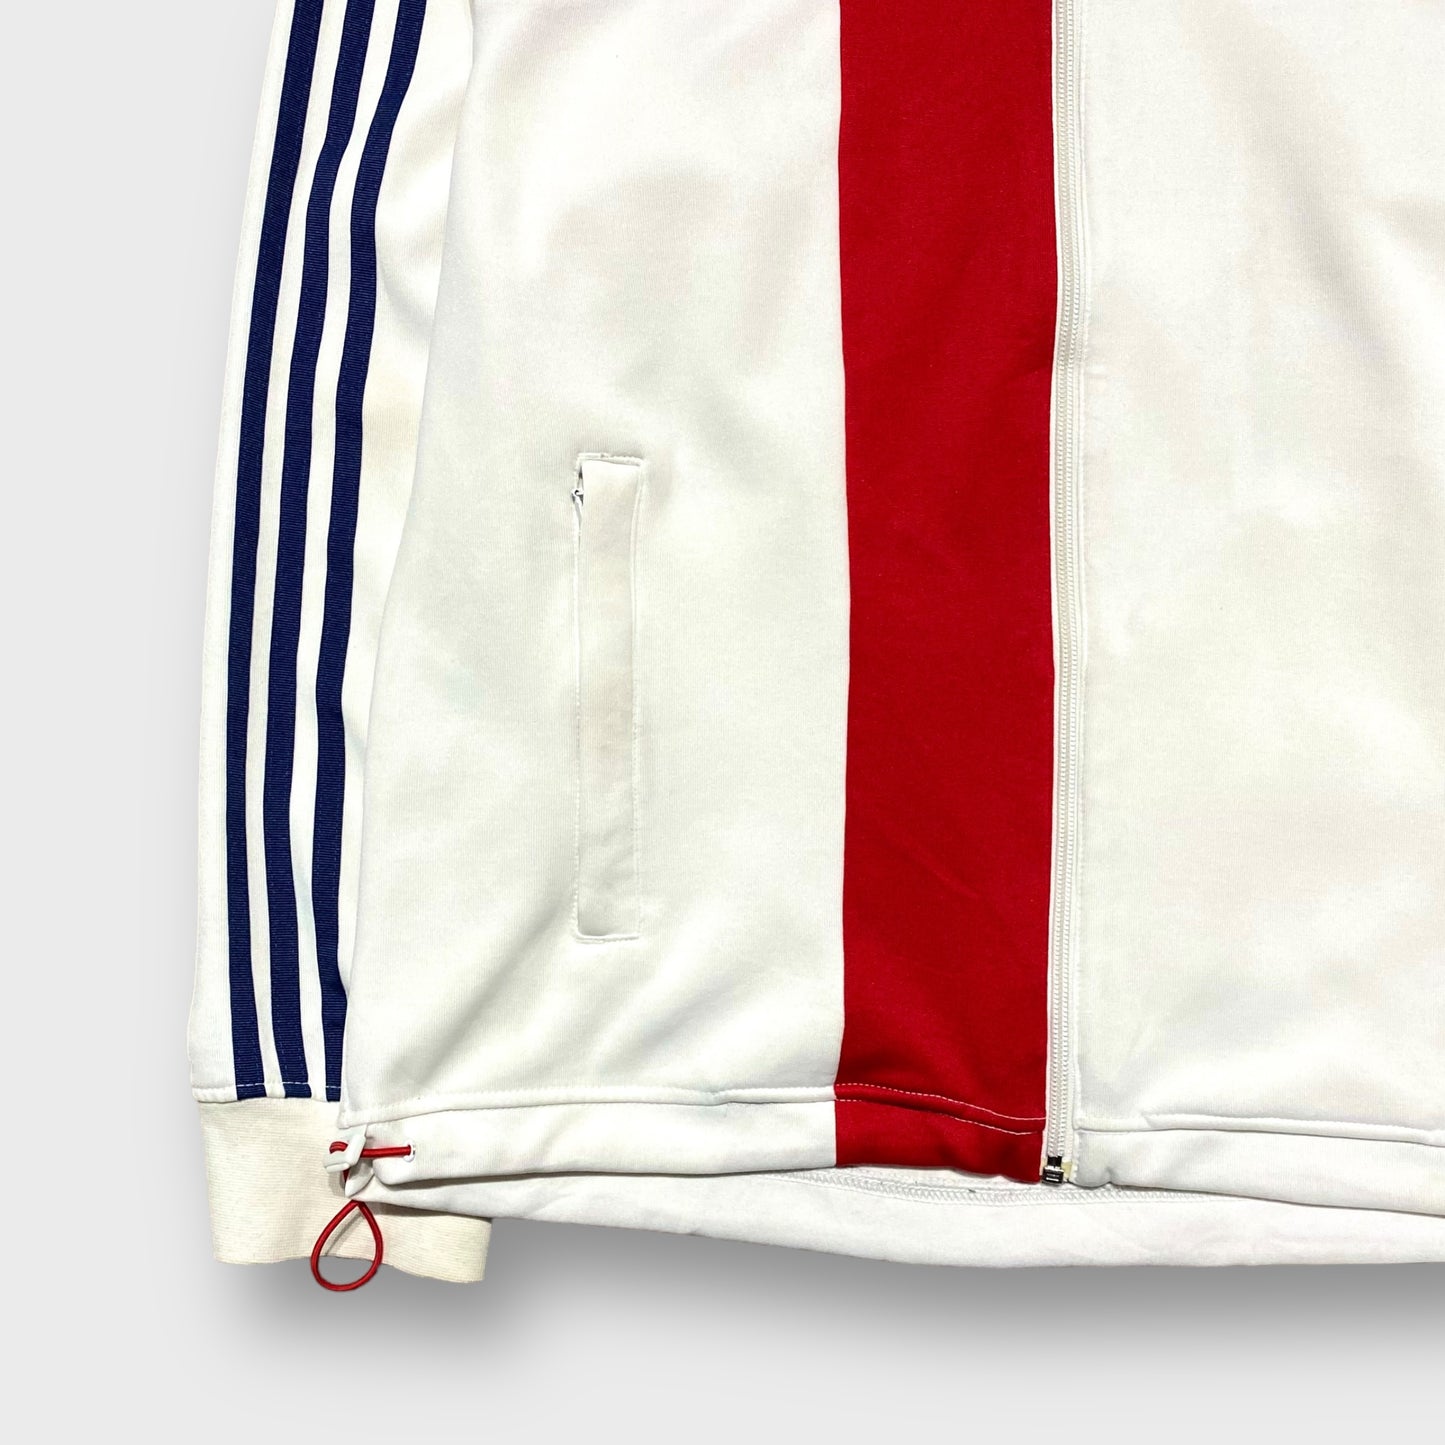 00's adidas "England" FIFA Wold Cup Track jacket